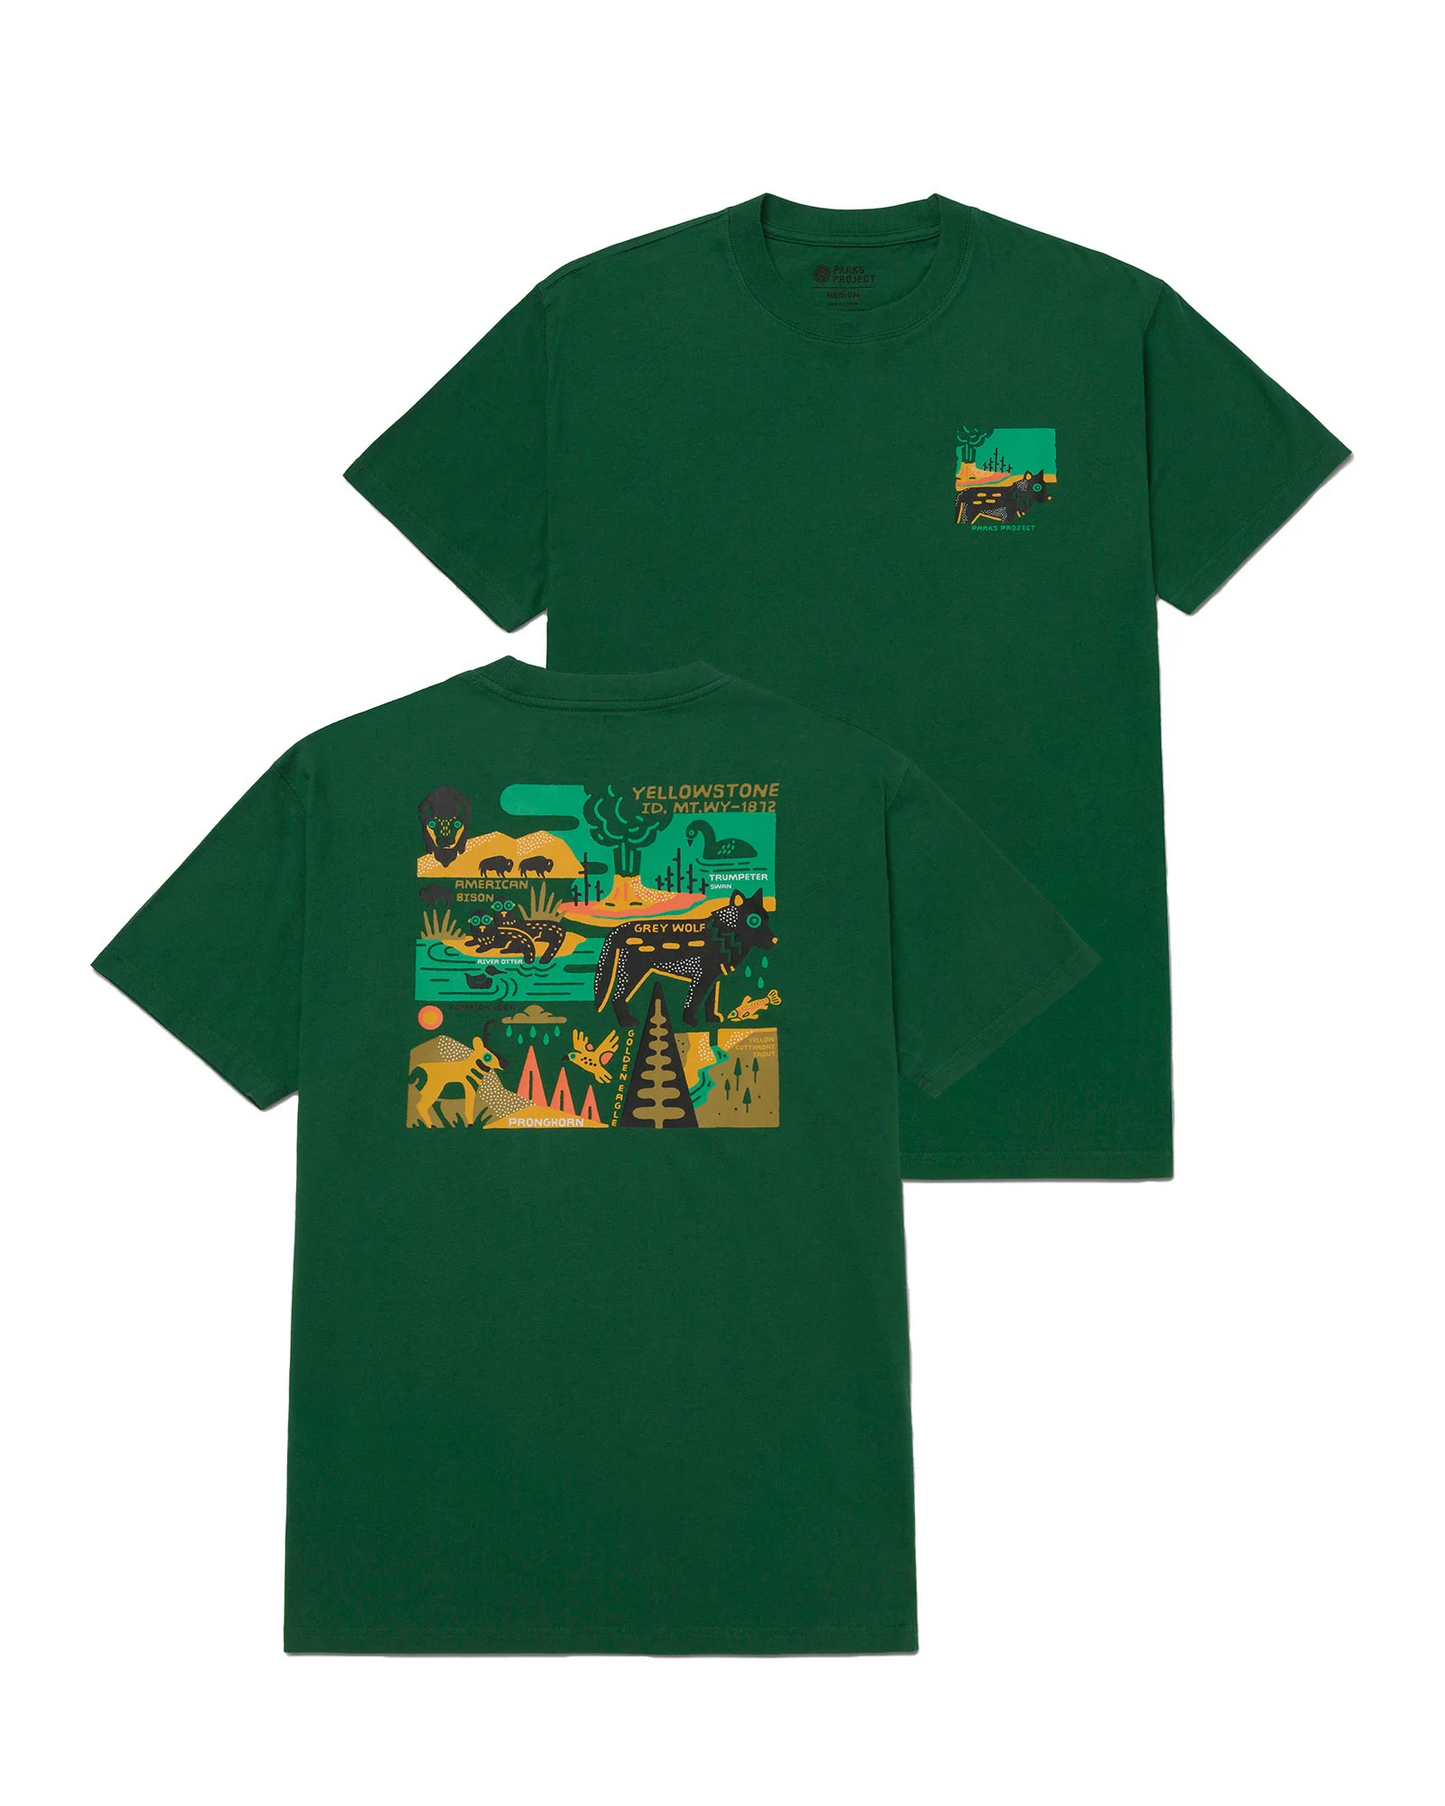 Parks Project Yellowstone 1872 Tee